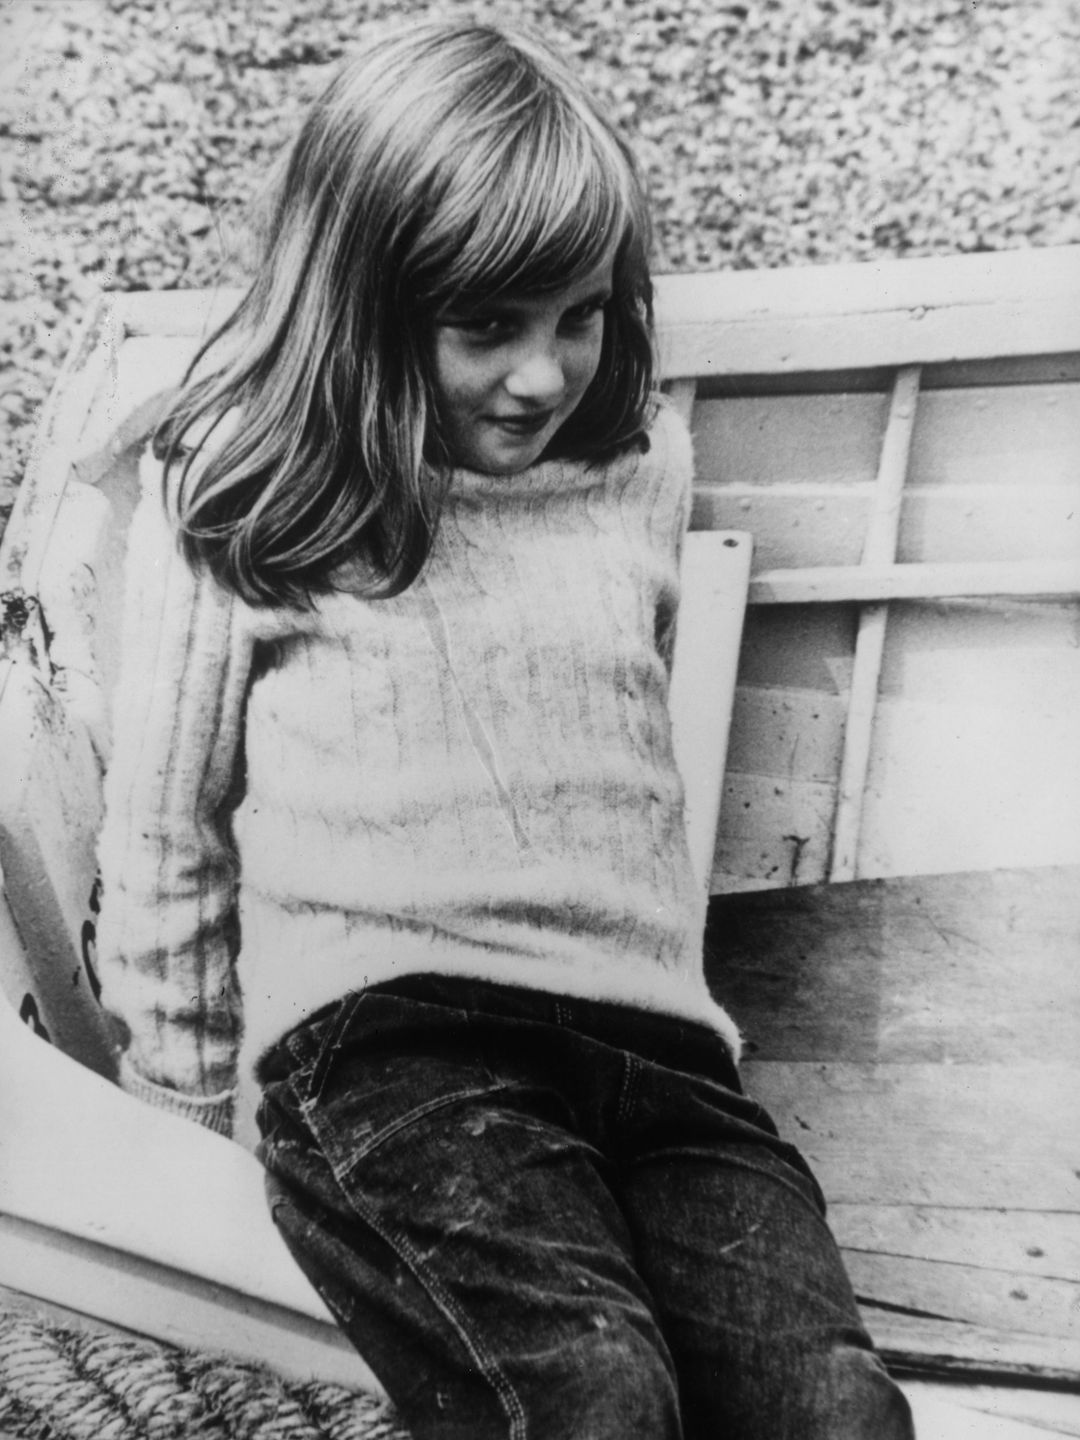 A young Princess Diana on a beach with a small rowboat